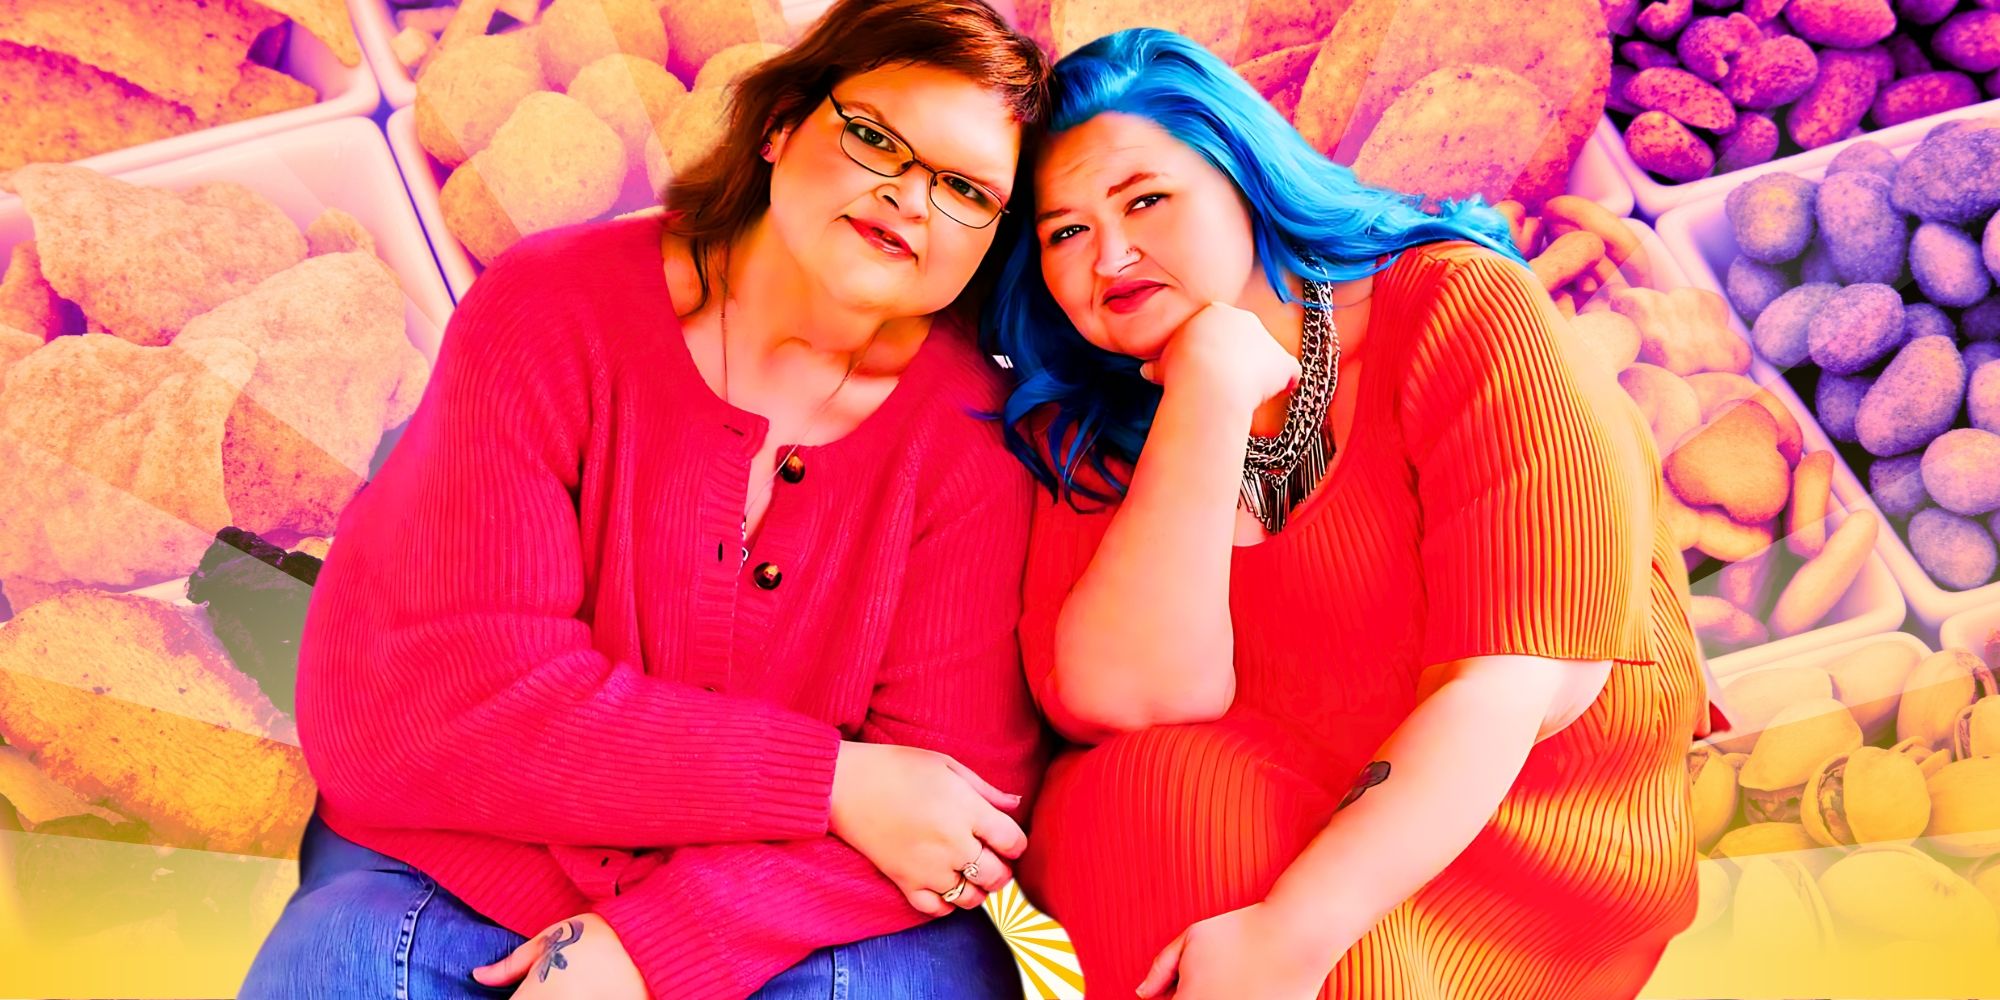 1000-lb Sisters Tammy and Amy Slaton posing for promo shot in front of snack background